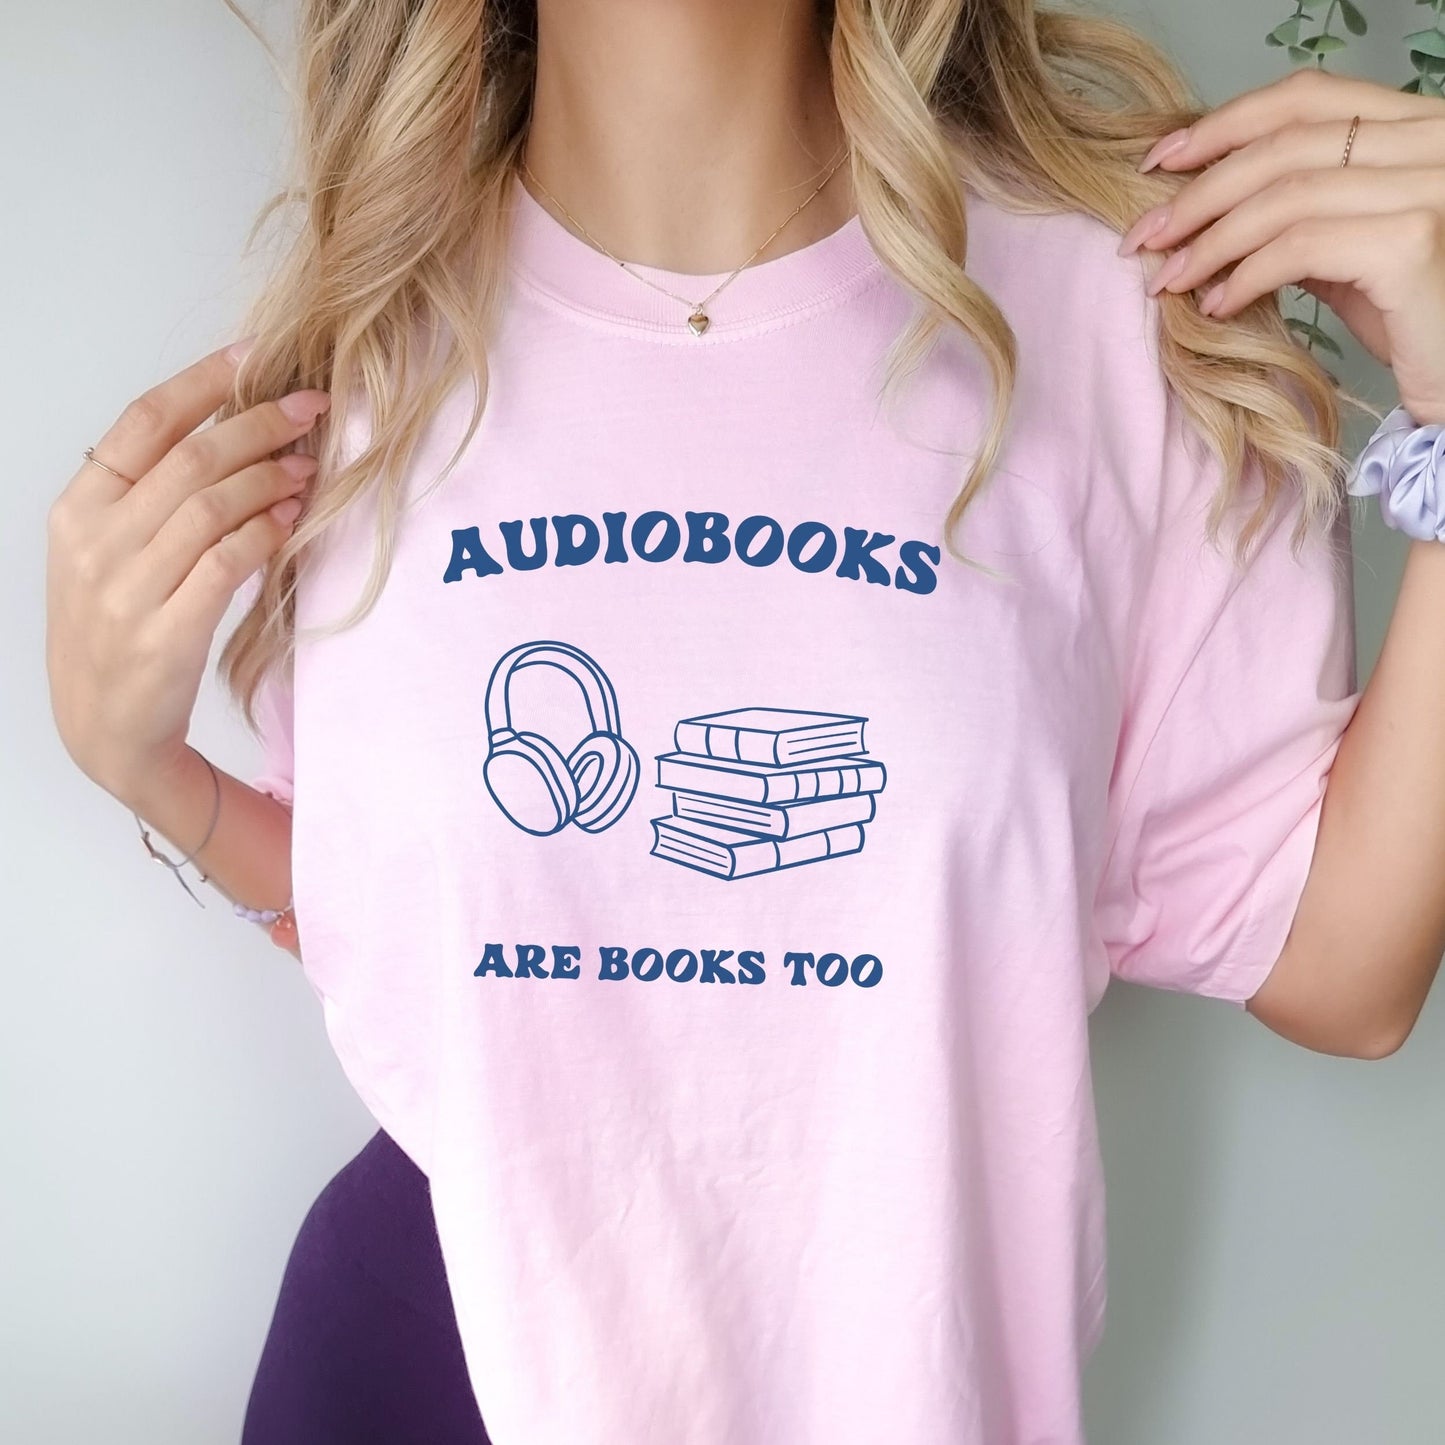 Audiobooks Are Books, Comfort Colors Audiobook Lover Shirt Read TShirt Romantasy Reader Booklover Gift Bookish Things Digital Book Shirt